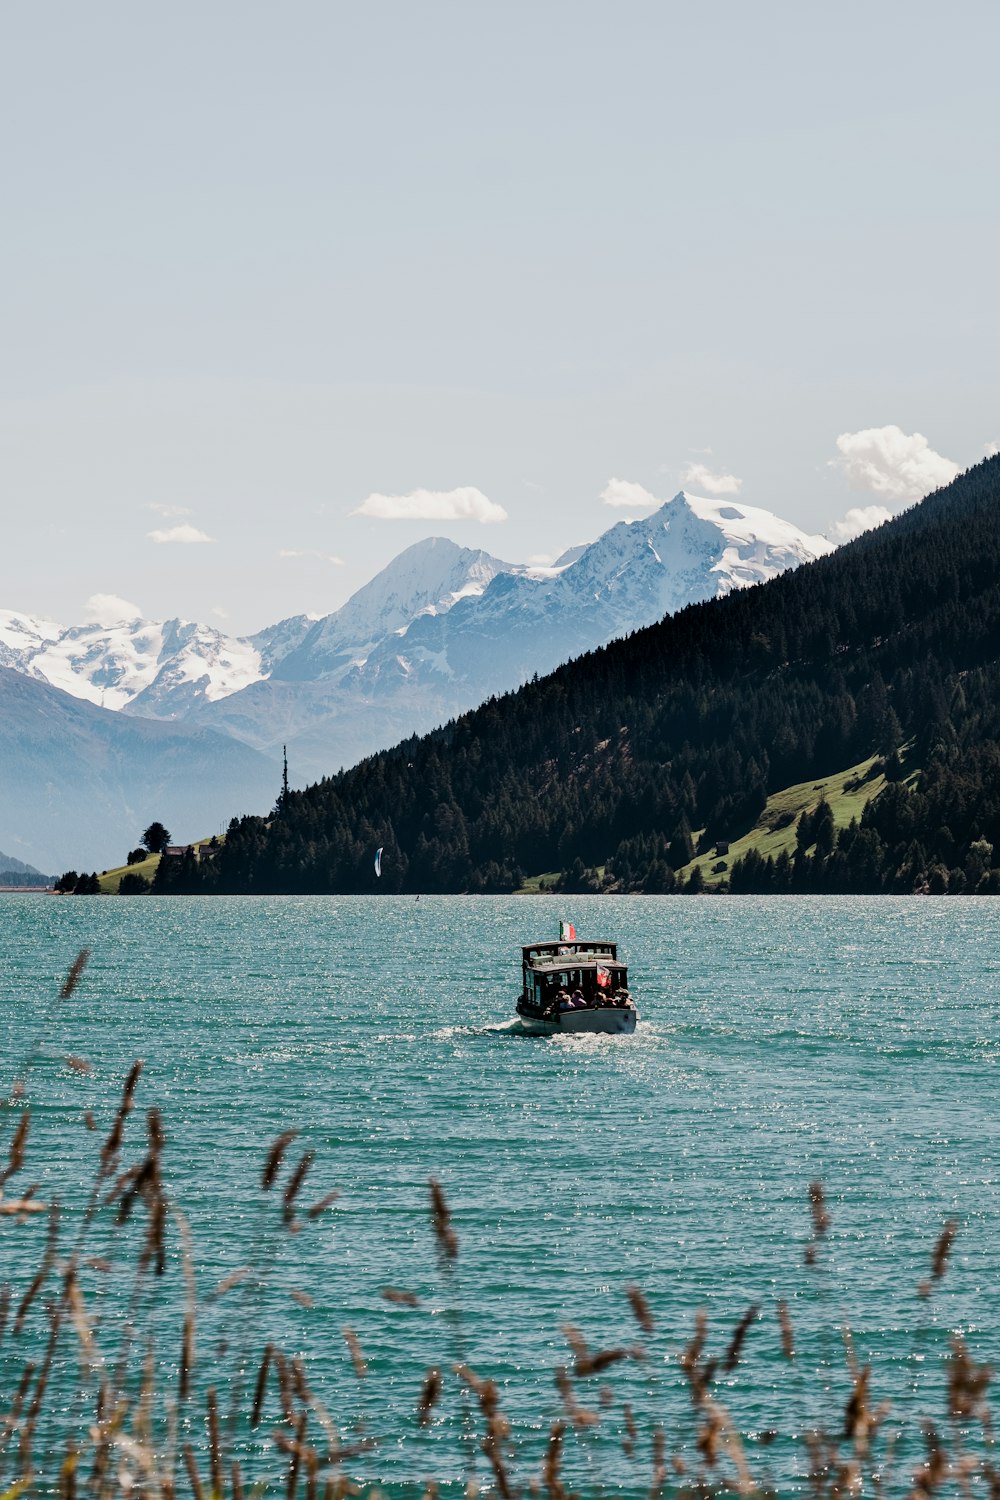 a boat in the water with mountains in the background